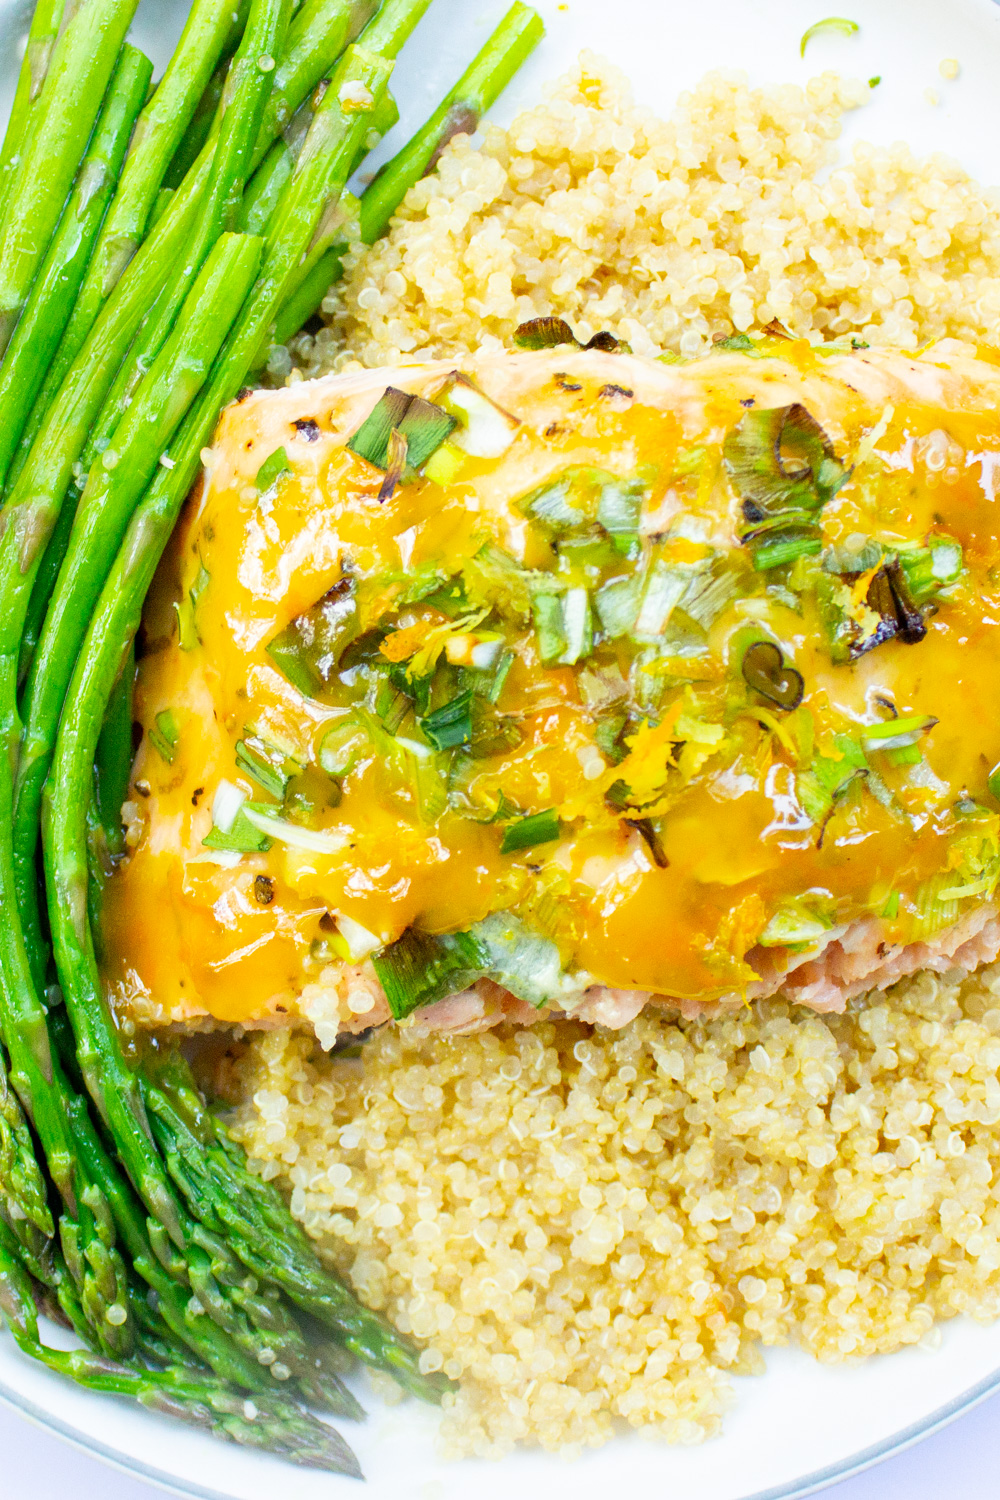 baked citrus salmon over quinoa with asparagus on plate.